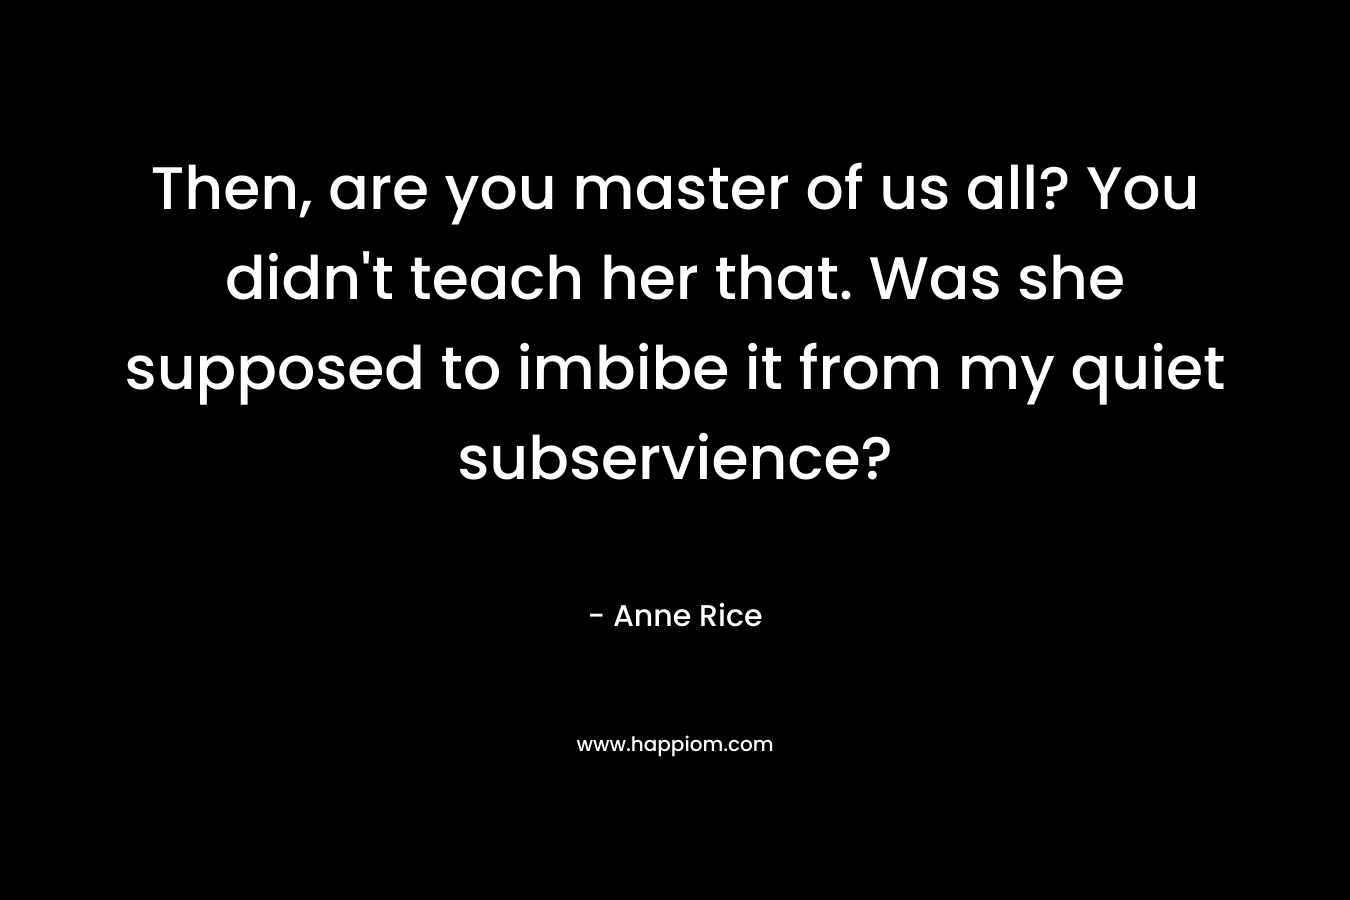 Then, are you master of us all? You didn’t teach her that. Was she supposed to imbibe it from my quiet subservience? – Anne Rice